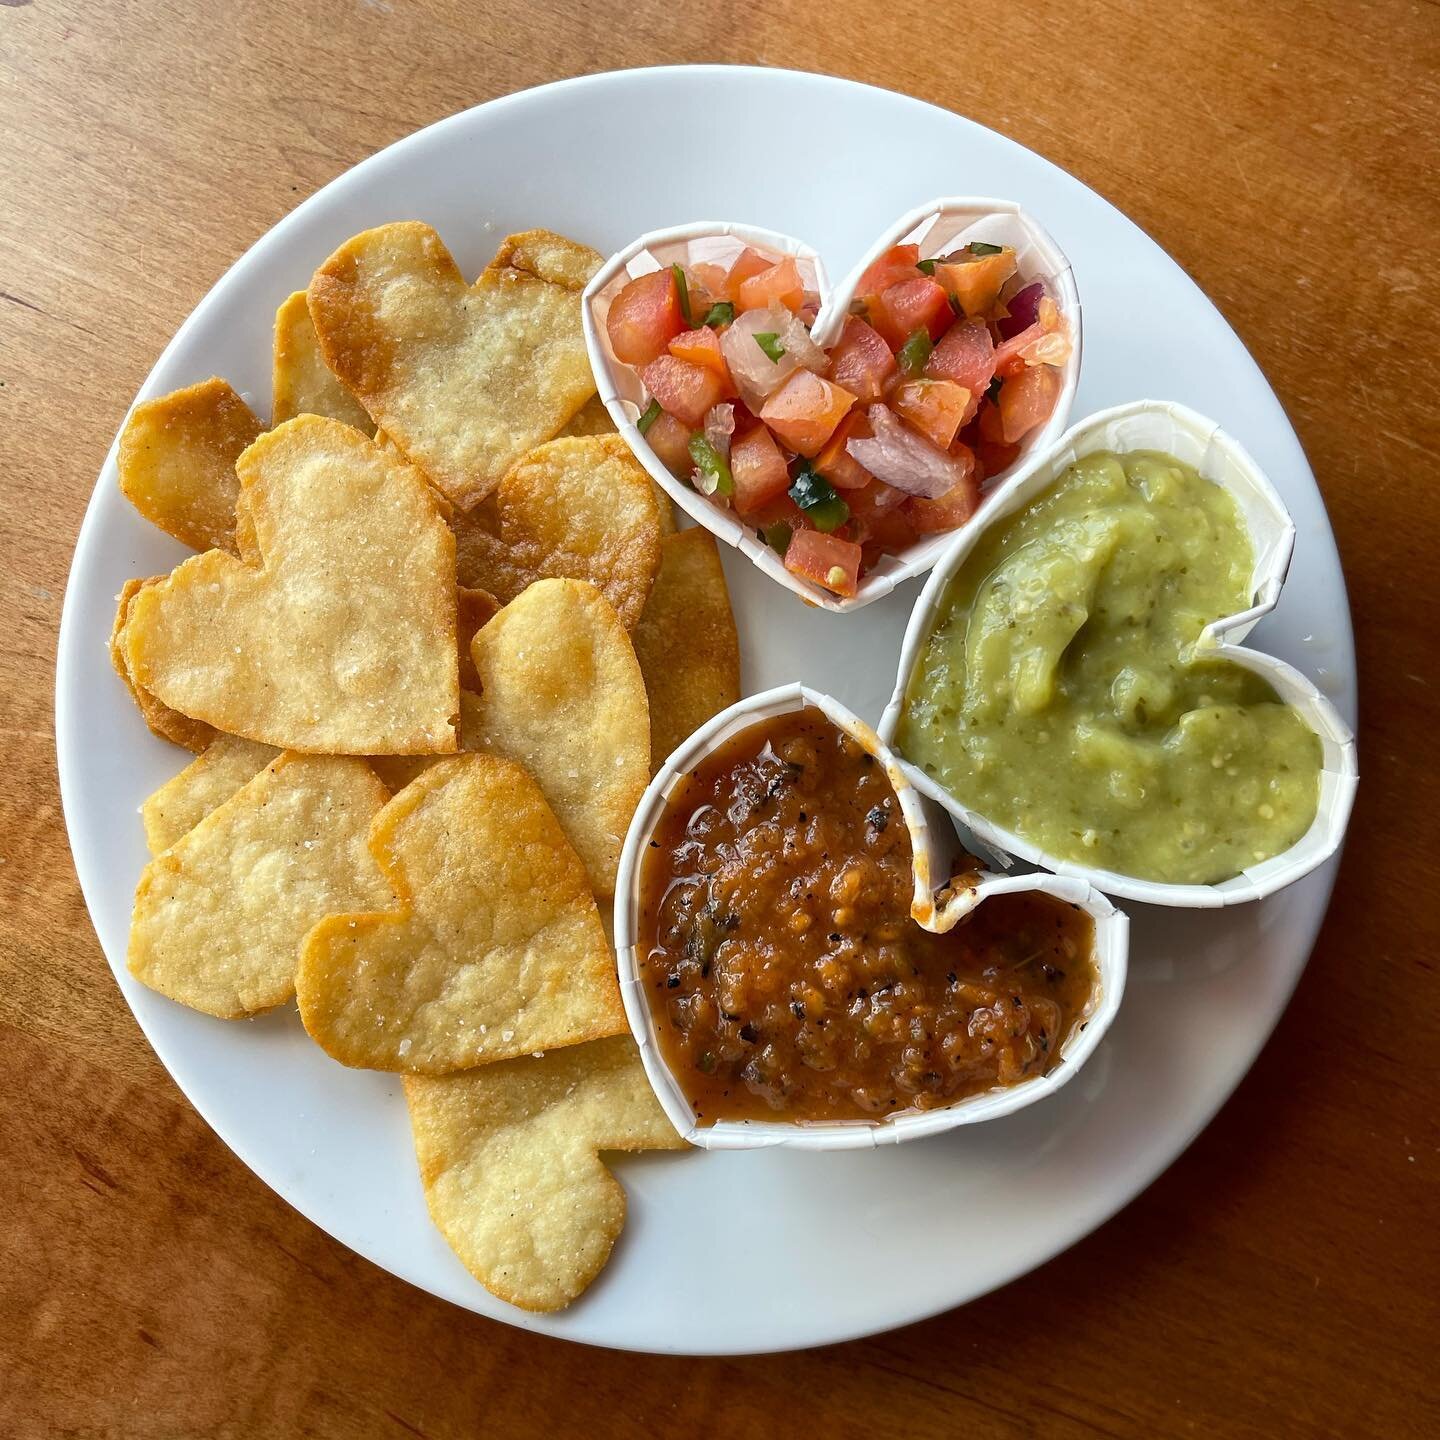 Nothing says &ldquo;I LOVE YOU&rdquo; more than some tex-mex! ❤️

Happy Valentine&rsquo;s Day!

(Please note that chips won&rsquo;t come in heart shape when ordered, it took way longer than we want to admit to make this picture happen) 

We&rsquo;re 